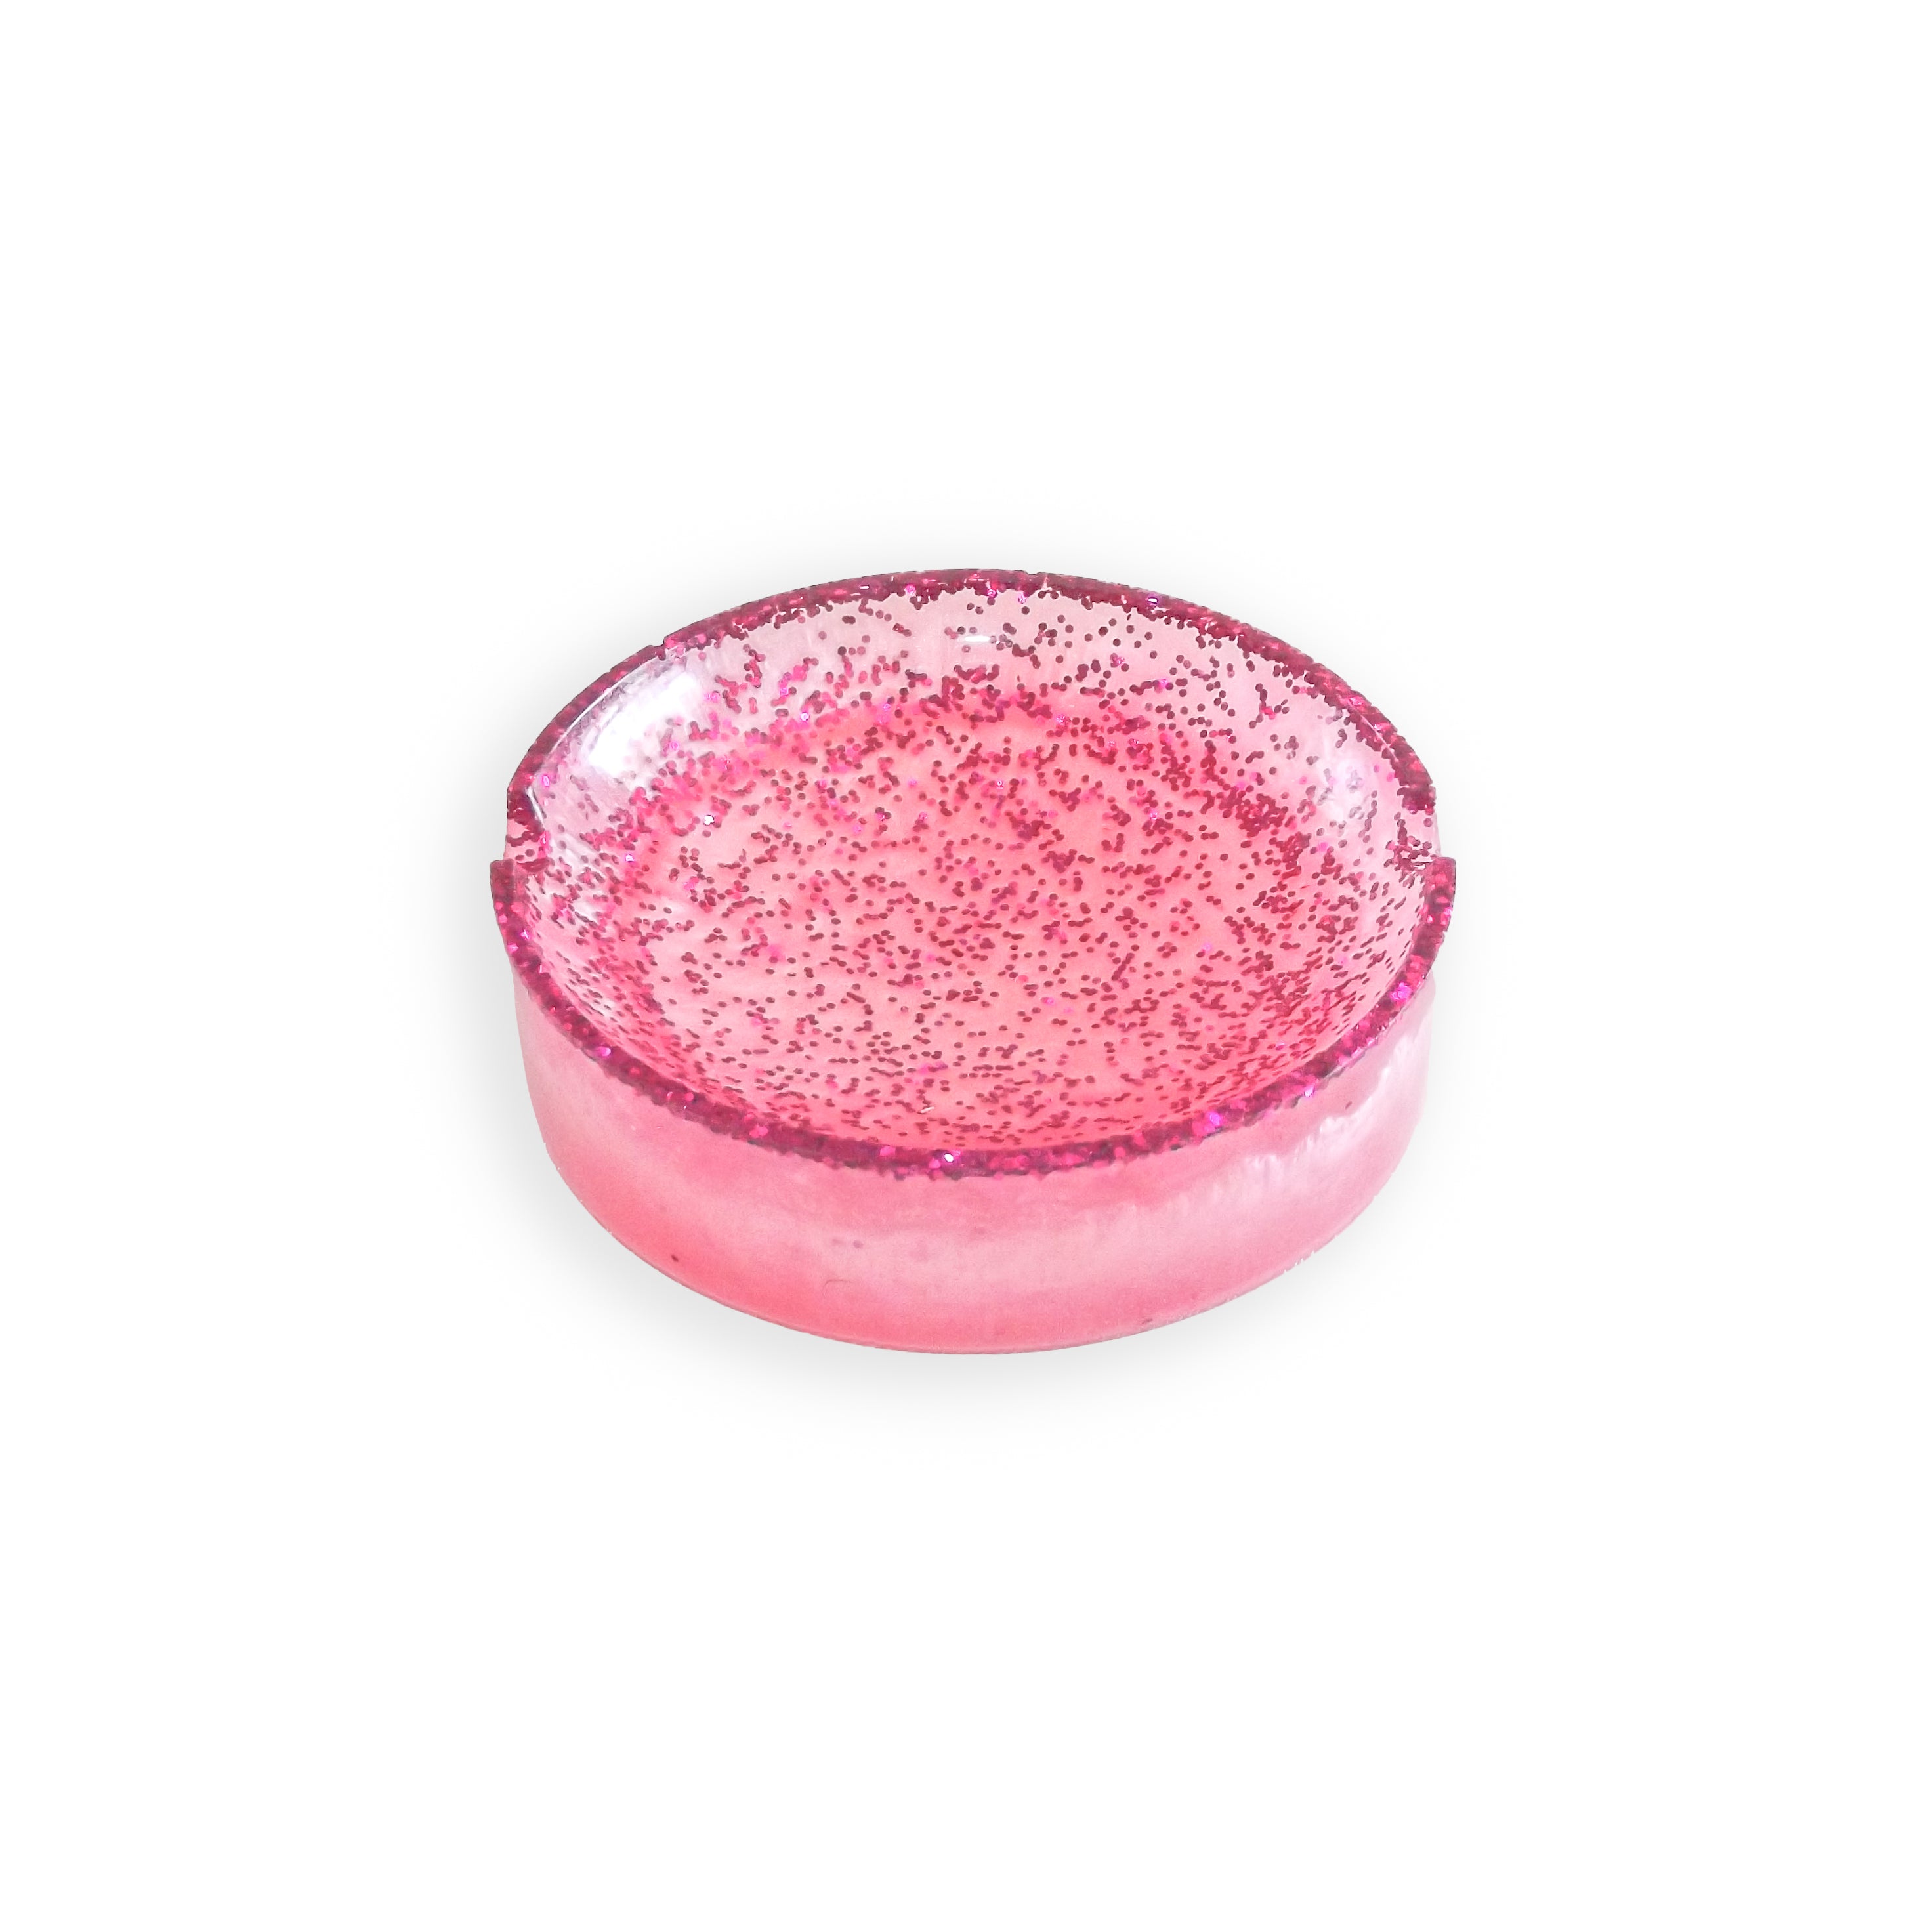 Image of a sparkling pink CanEmpire resin ashtray from CanArt collection. This handcrafted piece made of eco-friendly resin offers heat protection as well as unmatched style & durability.